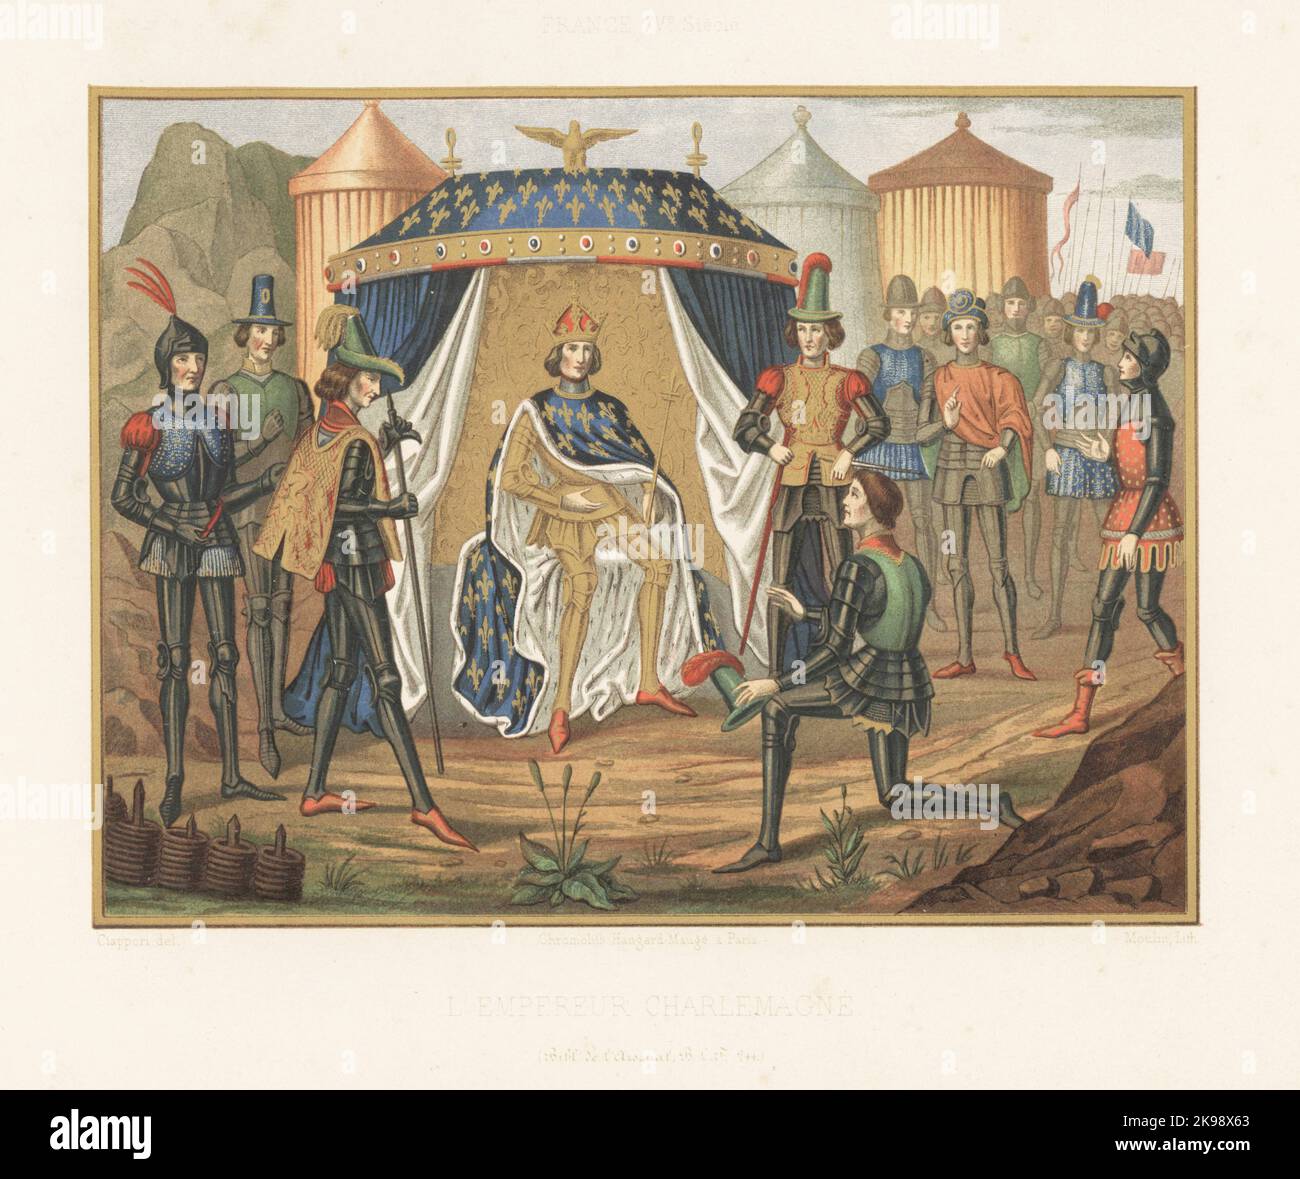 Emperor Charlemagne in gold plate armour and ermine mantle seated in a military tent. His devoted servant Maulgis kneels before him. The fleurs-de-lys pattern is an anachronism. France, XVe siecle. From a manuscript romance, Folio 359, Tome 1, MS BLF 244, Bibliotheque de l'Arsenal. Chromolithograph by Moulin  after an illustration by Claudius Joseph Ciappori from Charles Louandre’s Les Arts Somptuaires, The Sumptuary Arts, Hangard-Mauge, Paris, 1858. Stock Photo